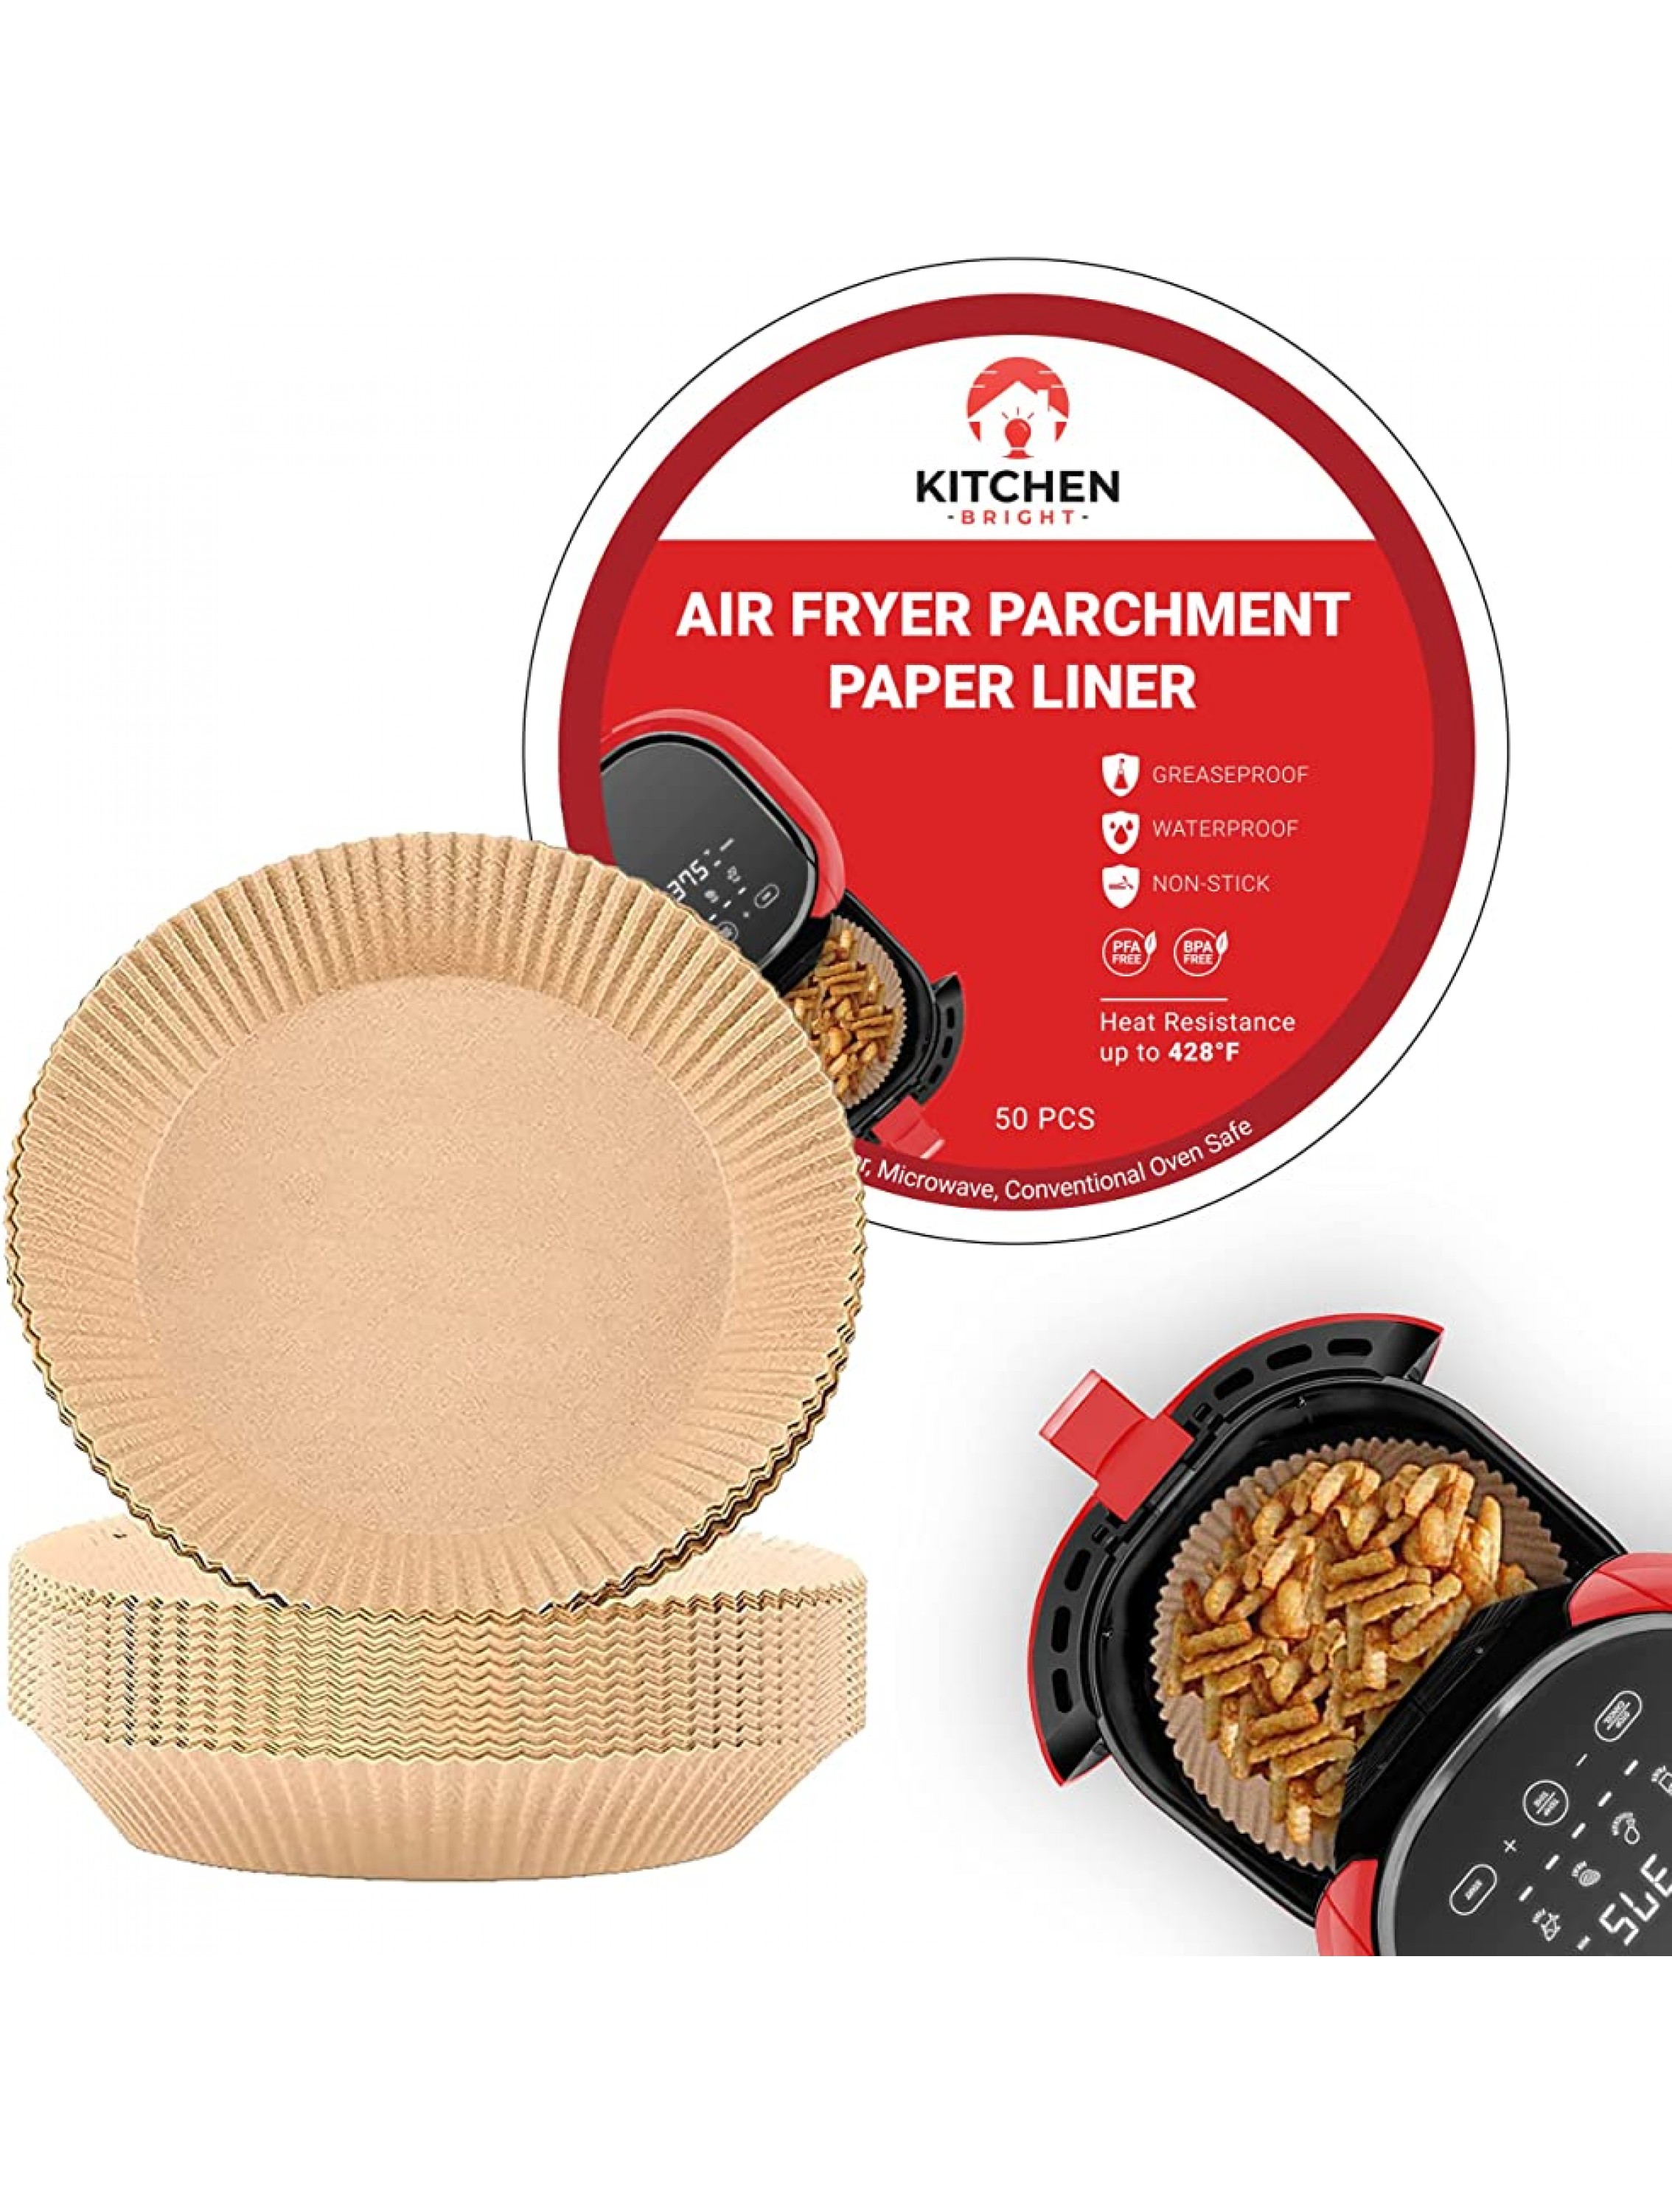 Kitchen Bright Air Fryer Paper Liner Parchment Paper: Air Fryer Liners Air Fryer Parchment Paper Premium Round Non-Stick Greaseproof Waterproof Air Fryer Accessories Paper for Air Fryer 50PCS - BB0WT27IP